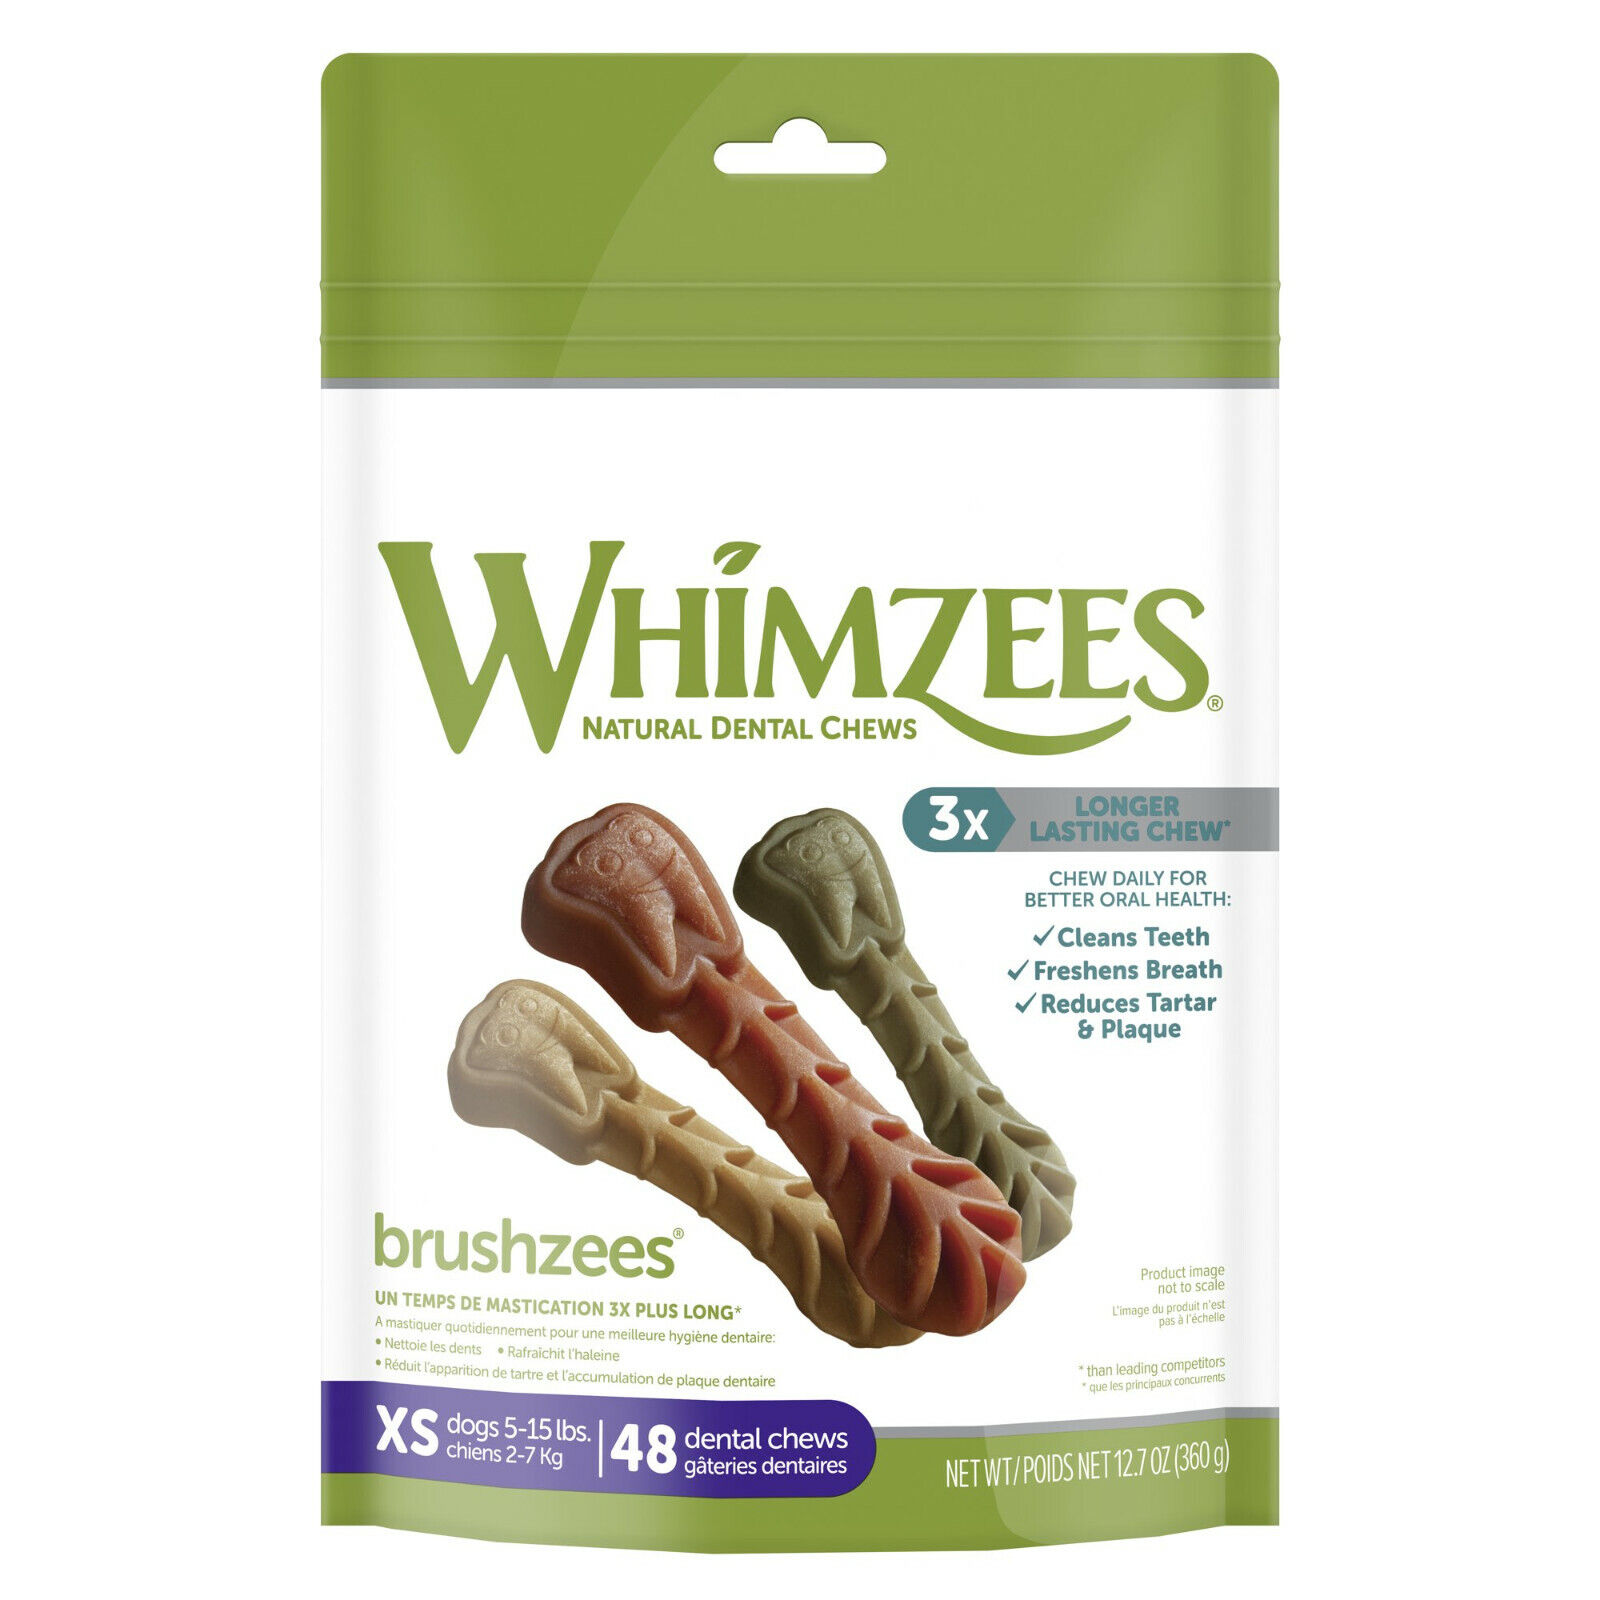  WHIMZEES BRUSHZEES NATURAL GRAIN-FREE DENTAL CHEWS 48 COUNT XS DOGS 5-15lbs